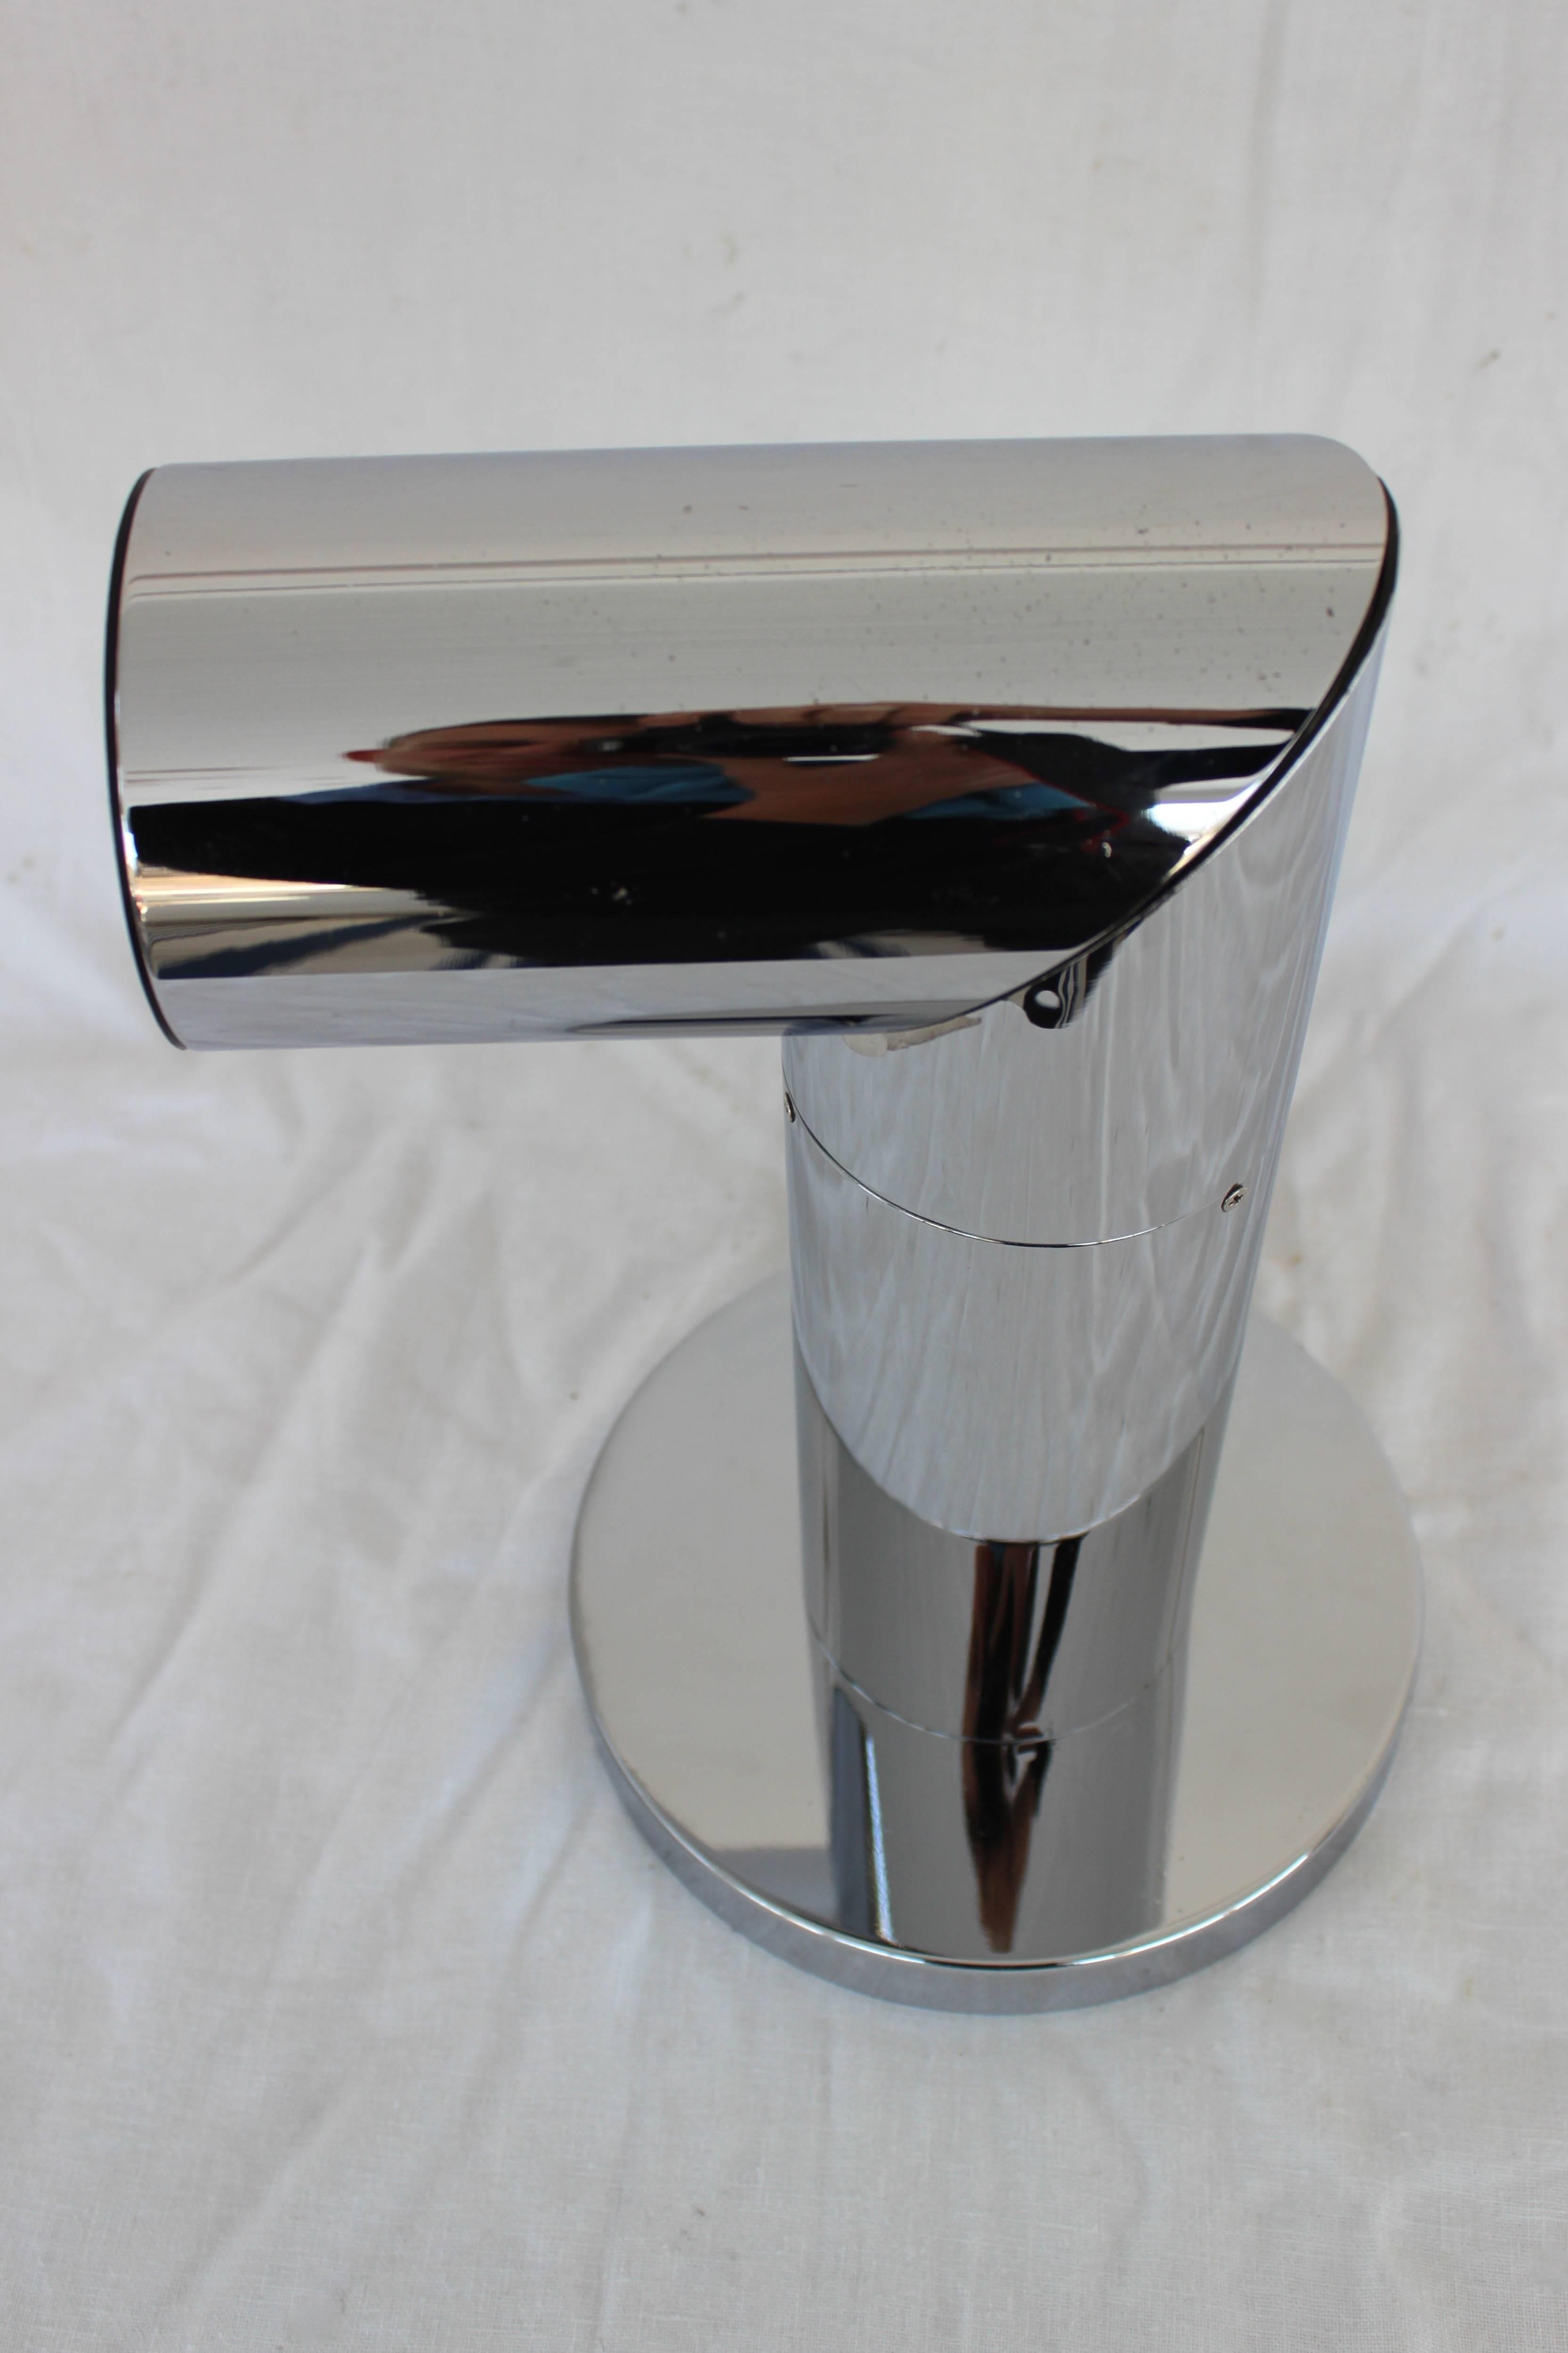 Chrome table lamp with adjustable nose (see on photographs) in the style of Arredoluce

Twisted: 9" W x 8" D x 13.5" H
Straight up: 8" dia x 17" H.